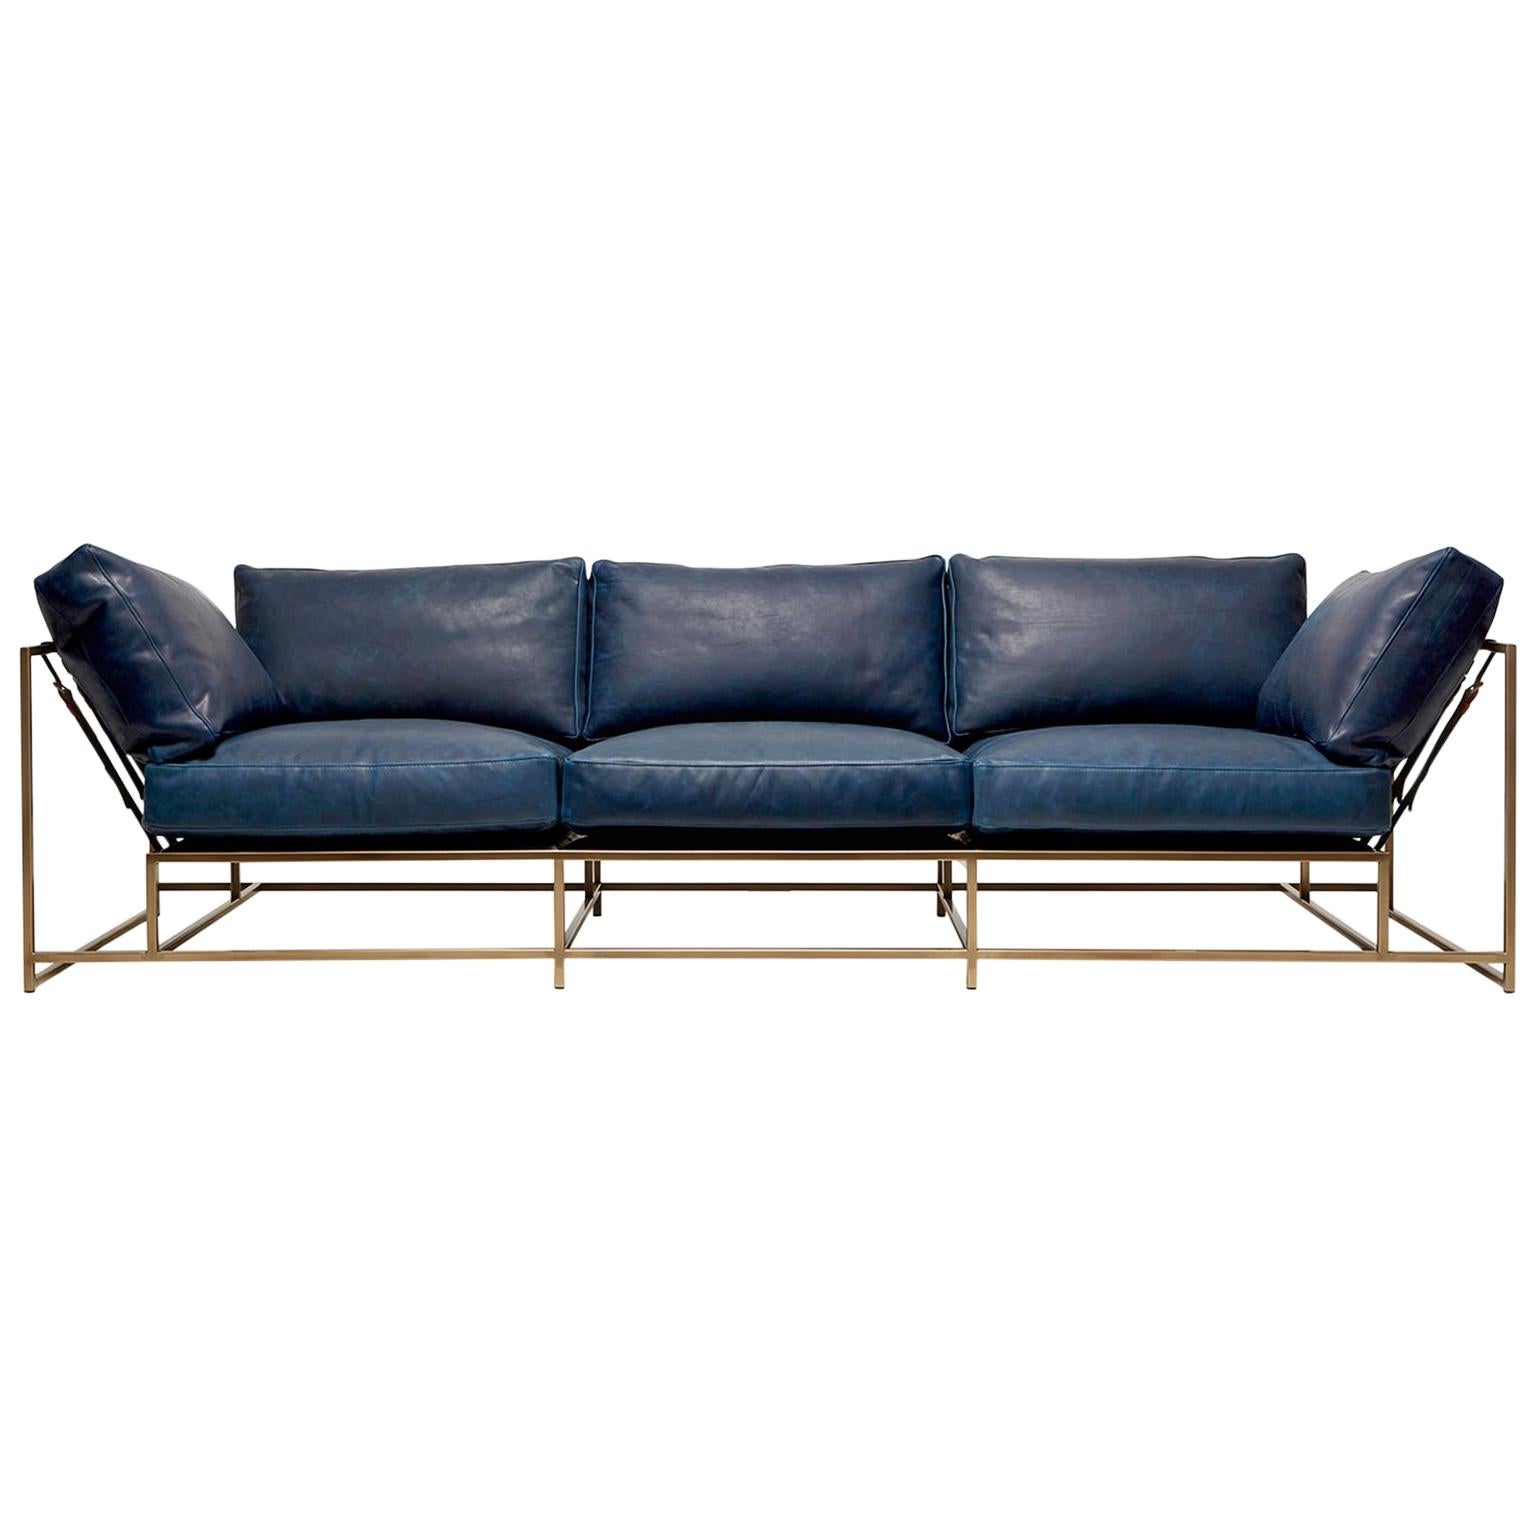 Waxed Navy Leather & Antique Brass Sofa For Sale